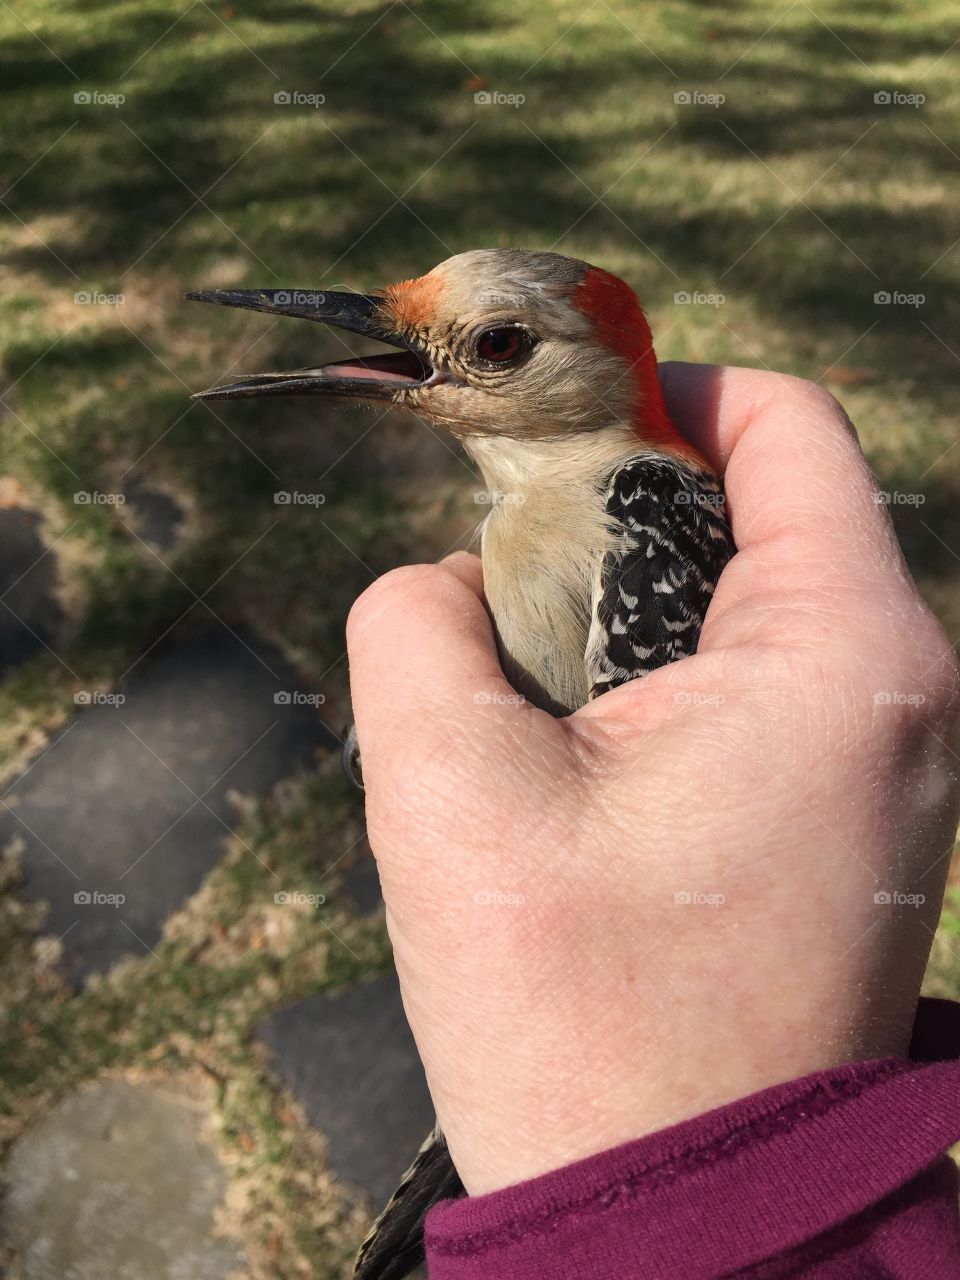 Saved a woodpecker that flew into my window. He was totally stunned but no wings were hurt. So I held him till he caught his breath and flew off. 